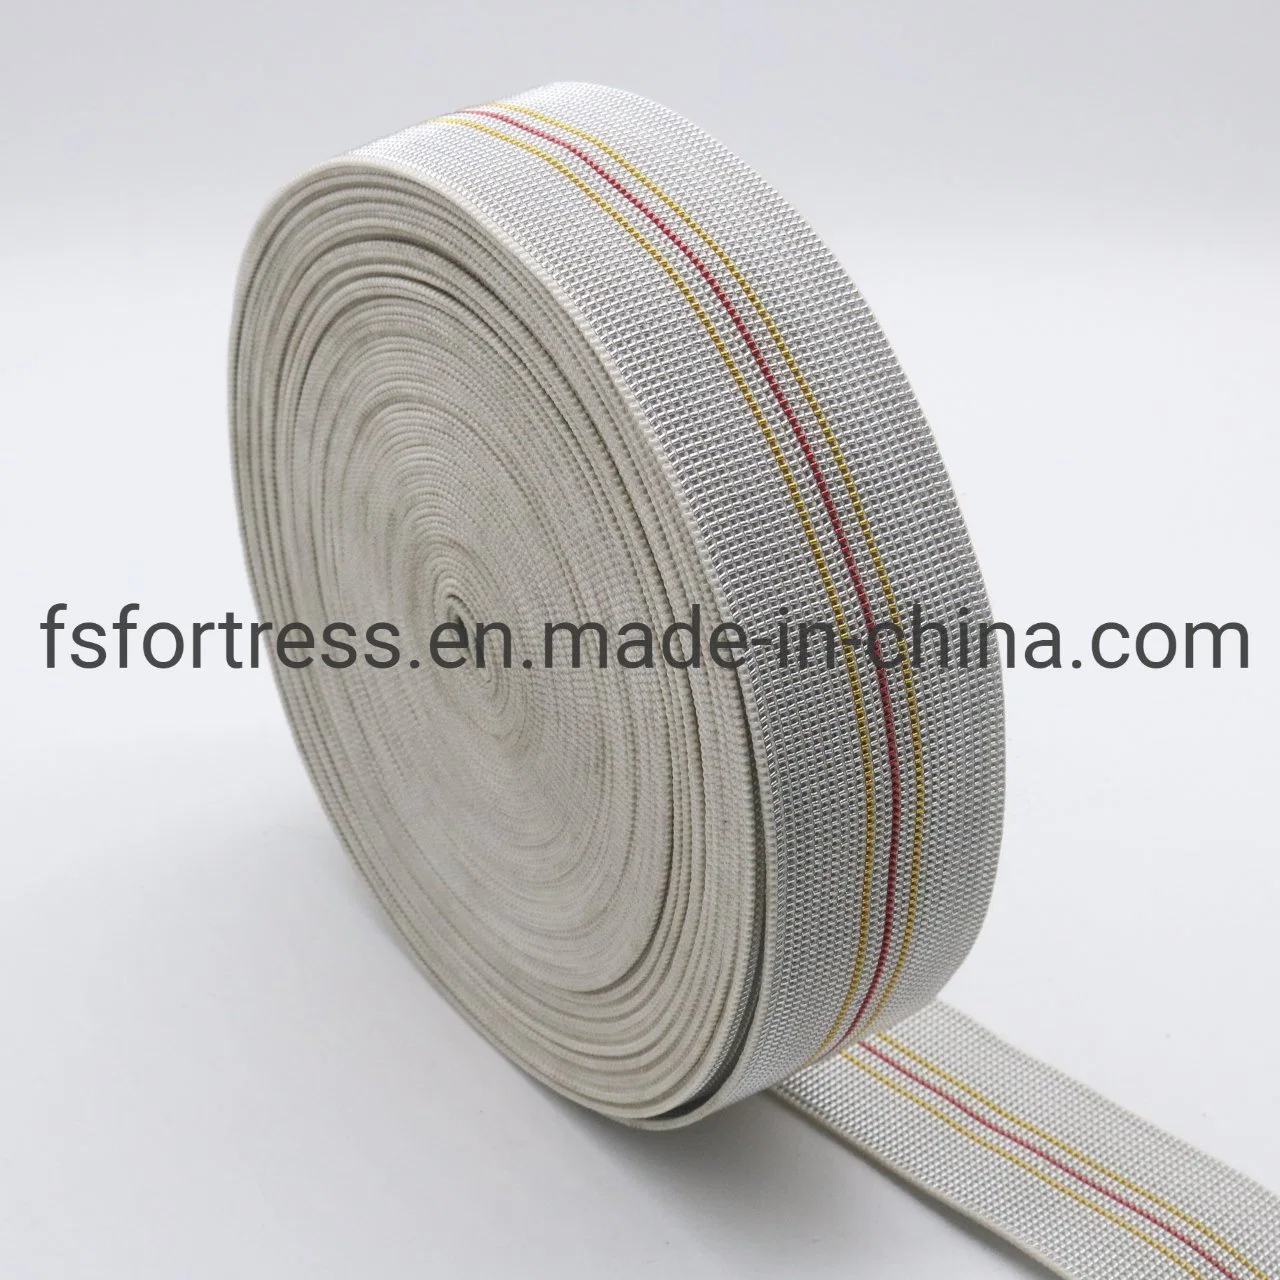 Furniture Webbing, Sofa, Chair Wholesale Woven Elastic with High Quality White